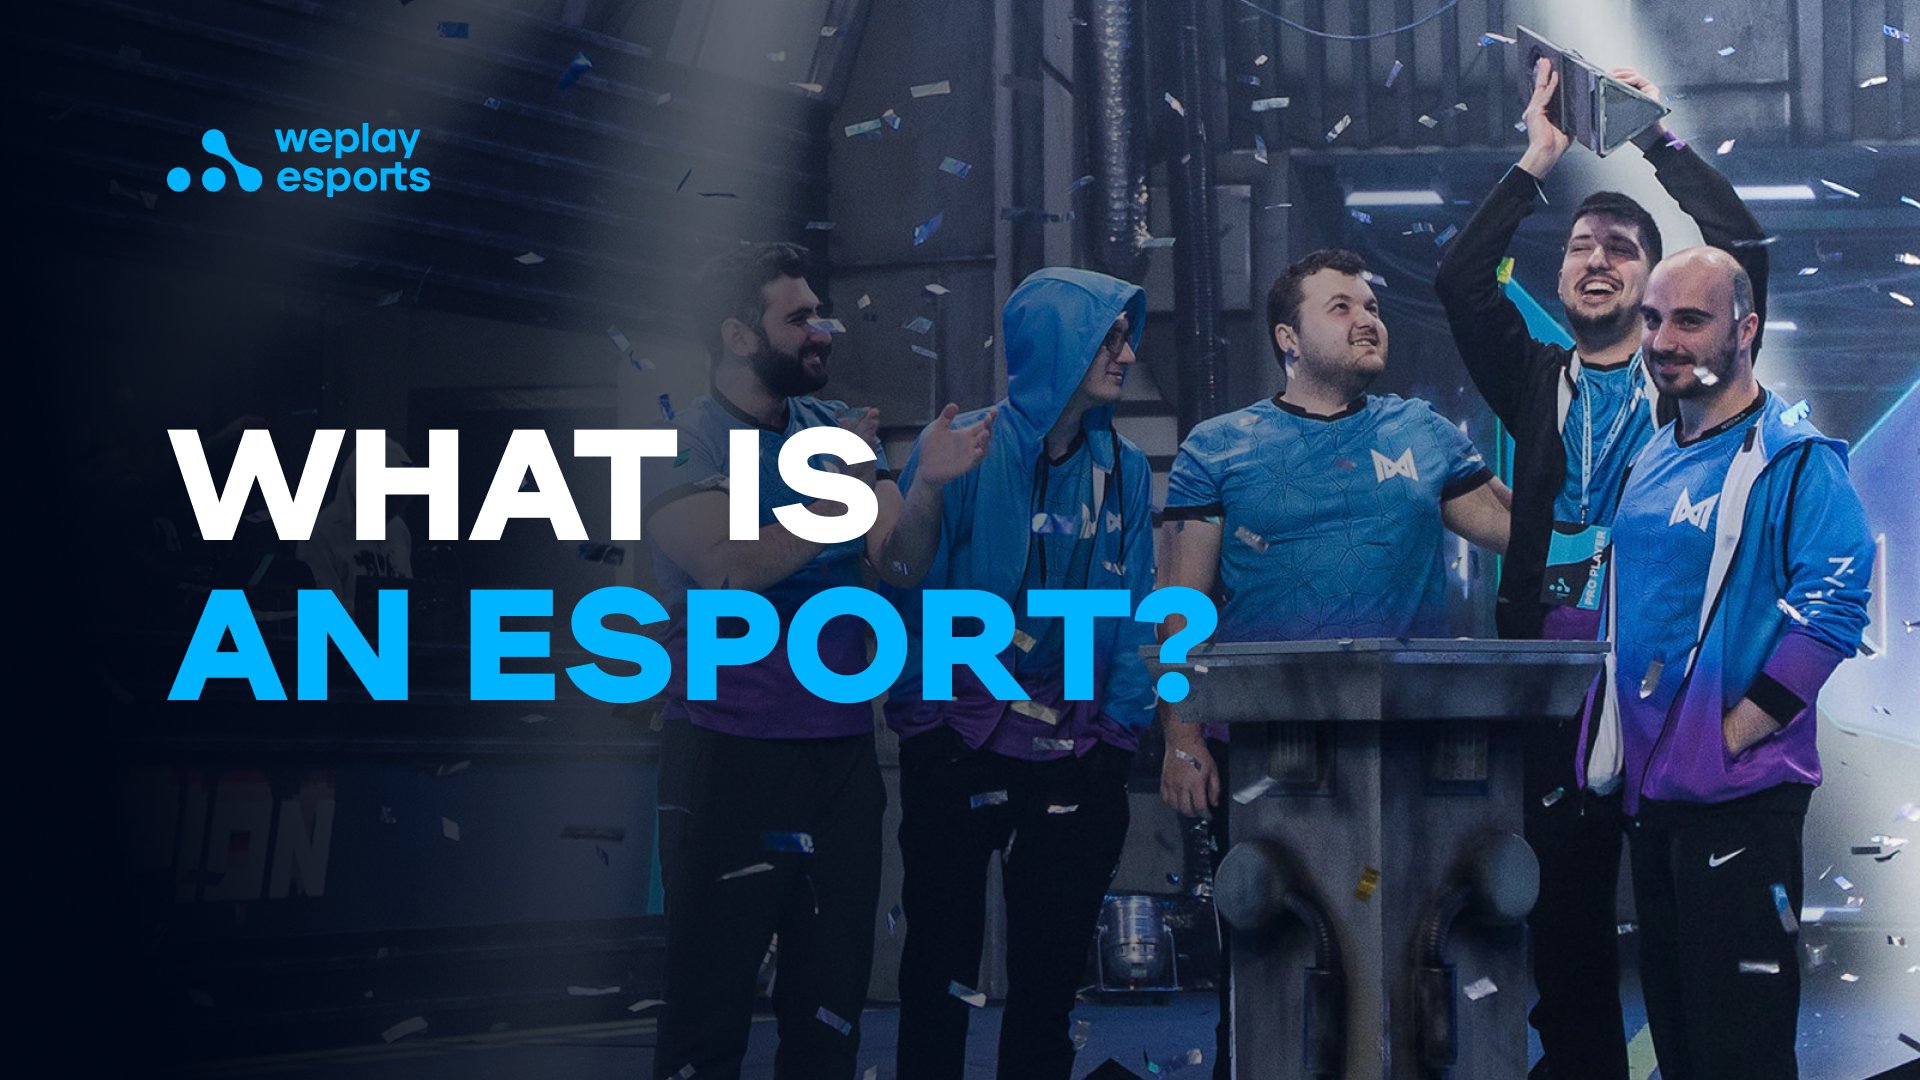 What Is an Esport?